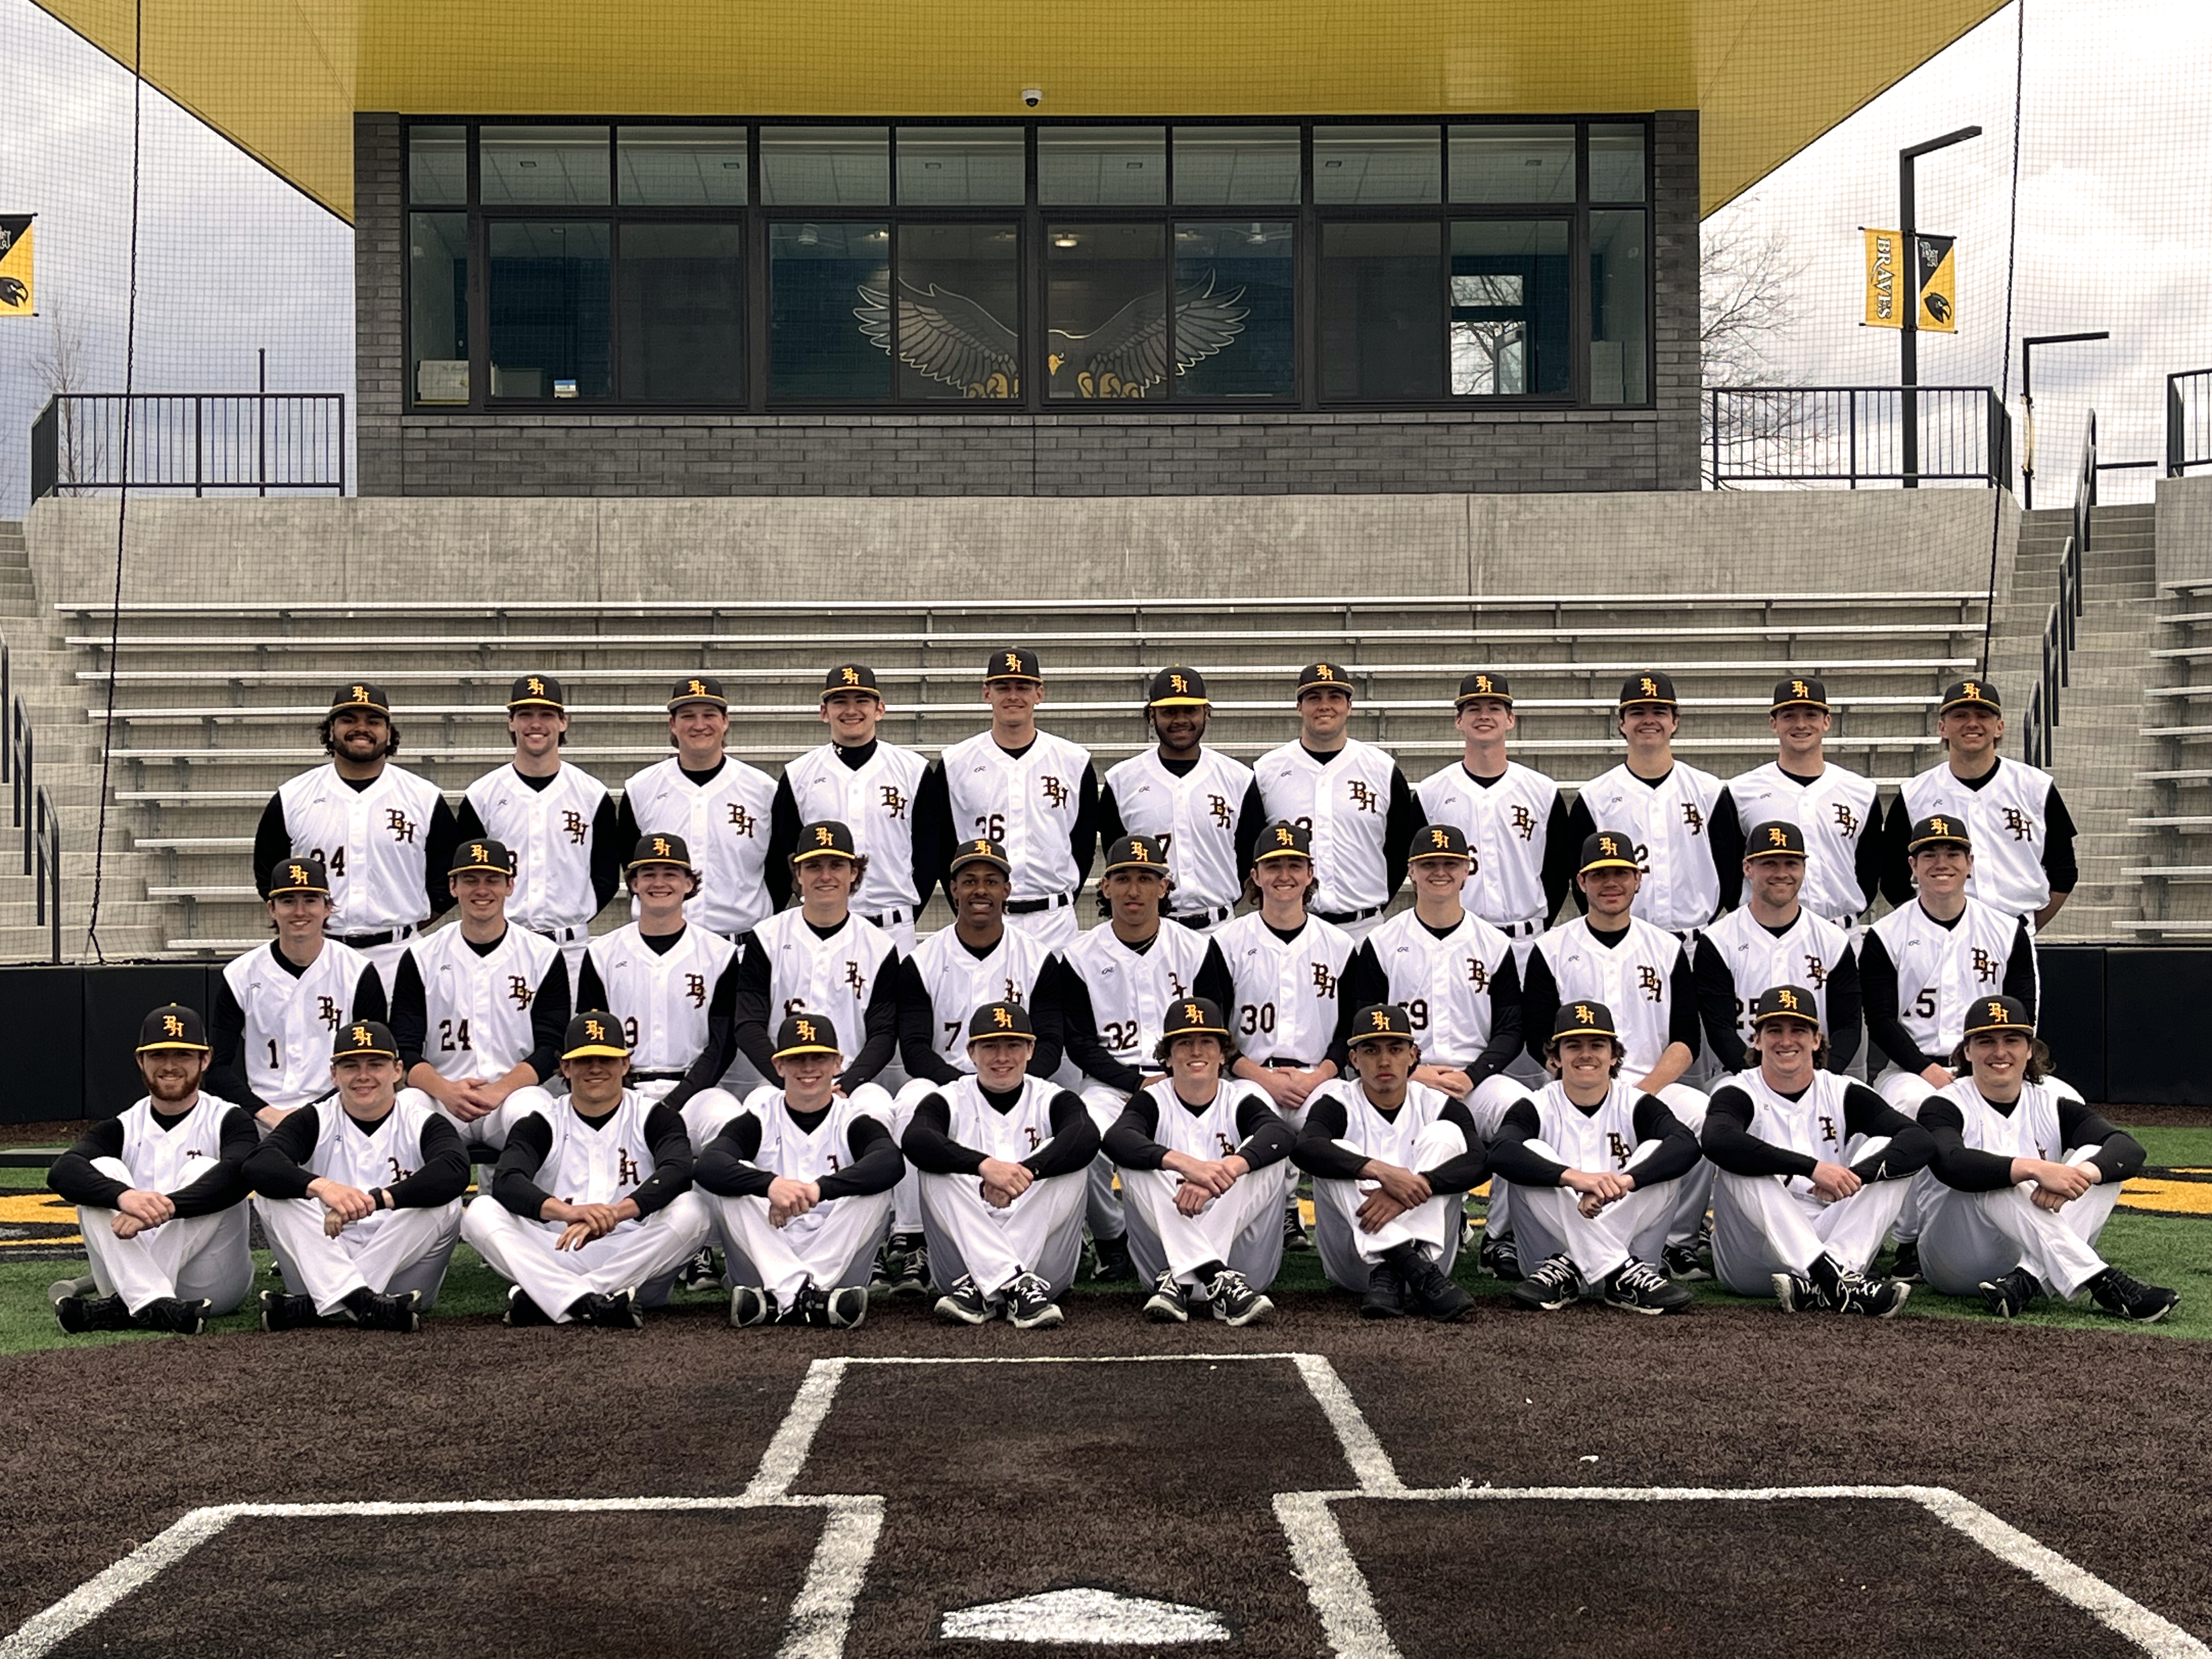 Baseball Team Photo. Click for high resolution download